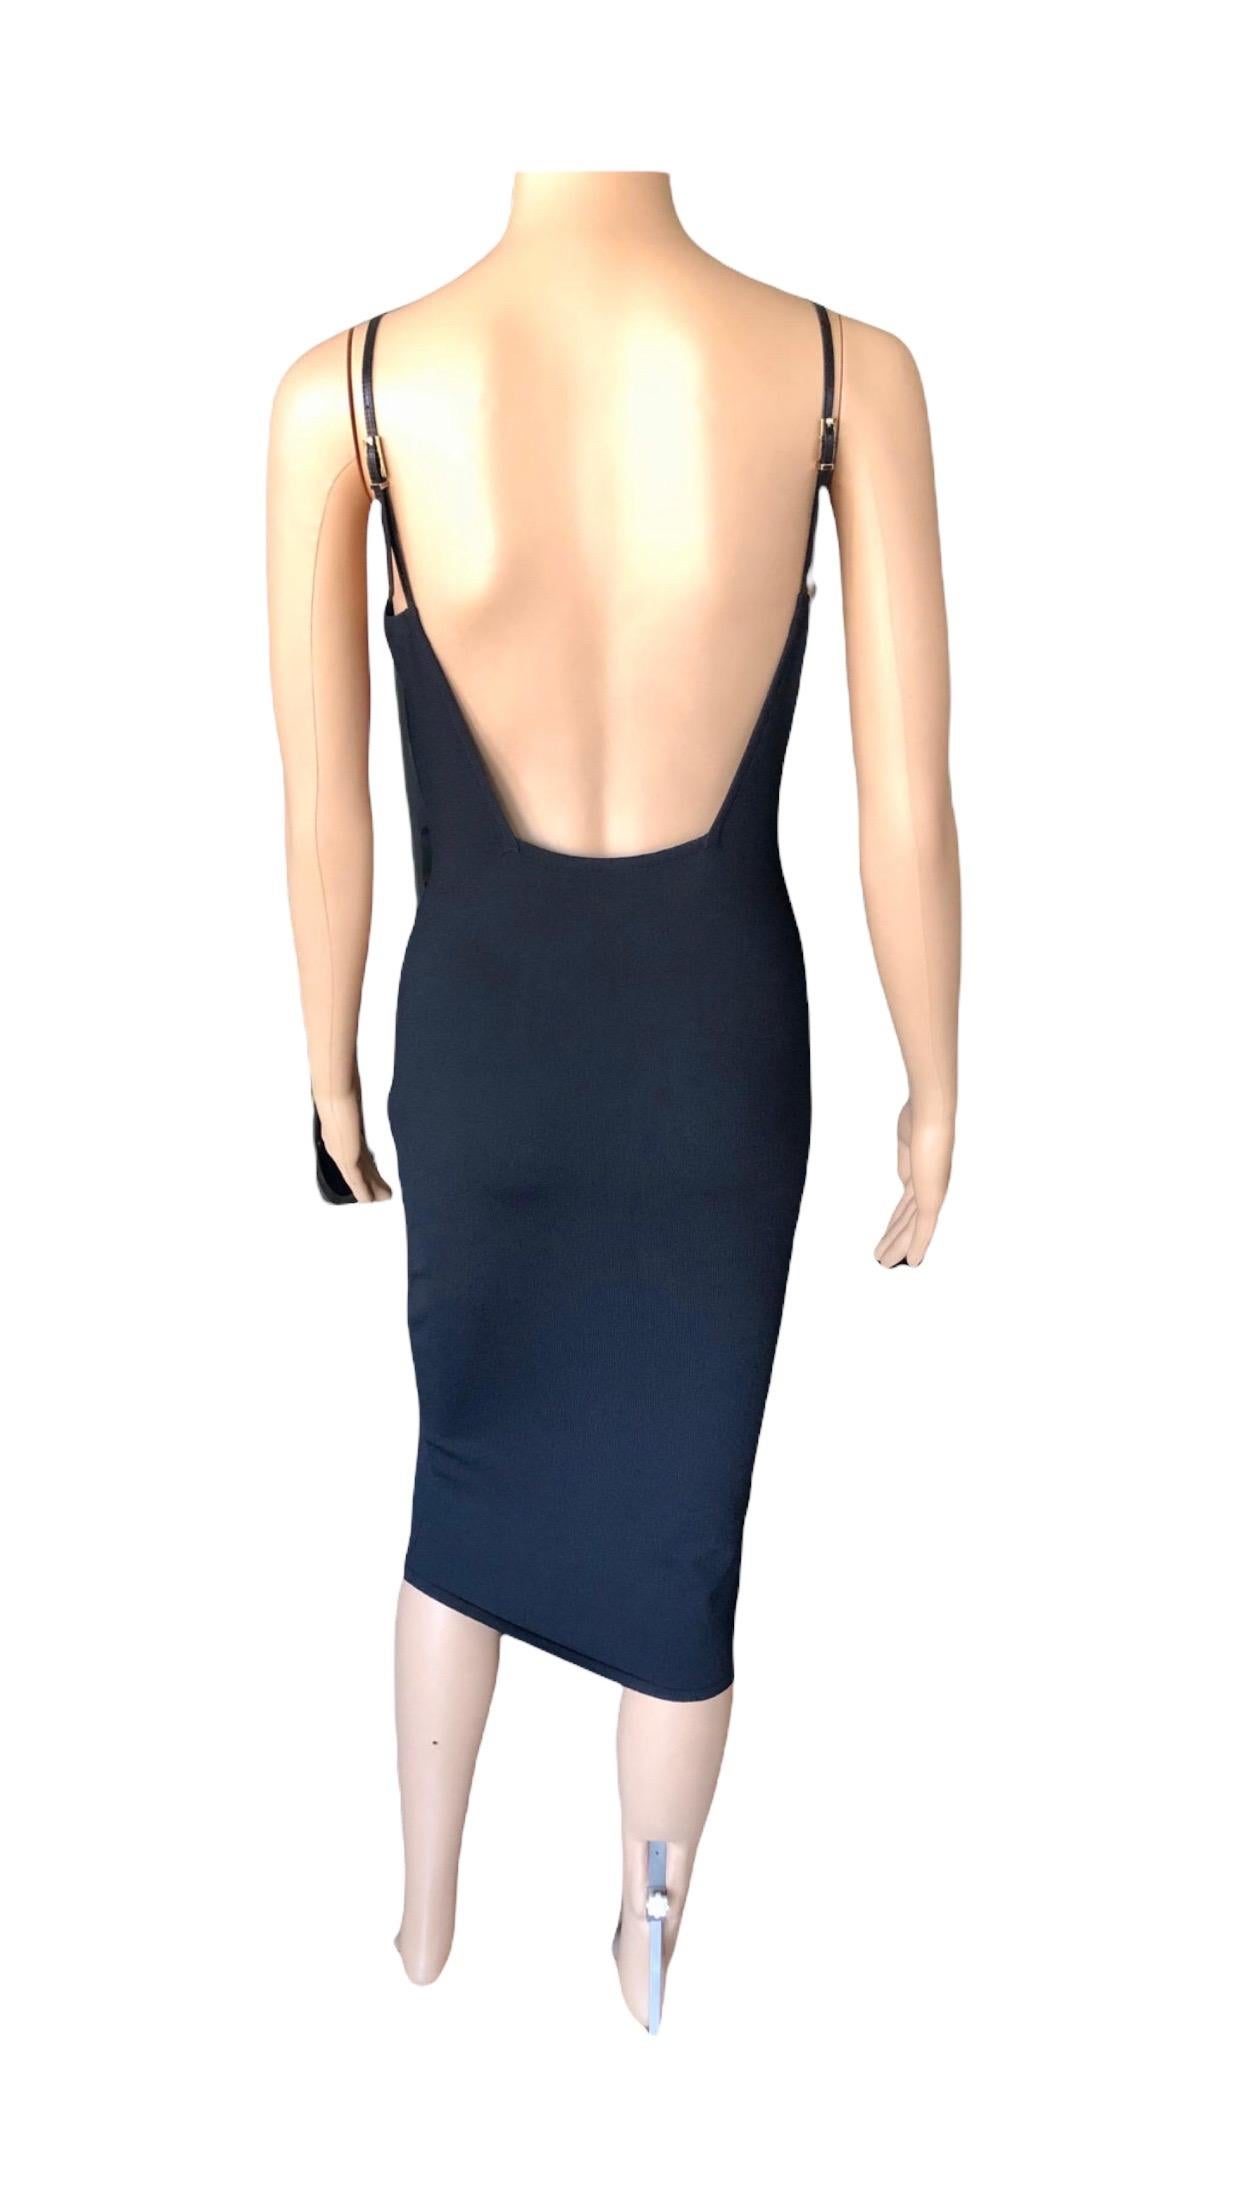 Tom Ford for Gucci S/S 1998 Bodycon Backless Buckle Straps Knit Black Midi Dress For Sale 5